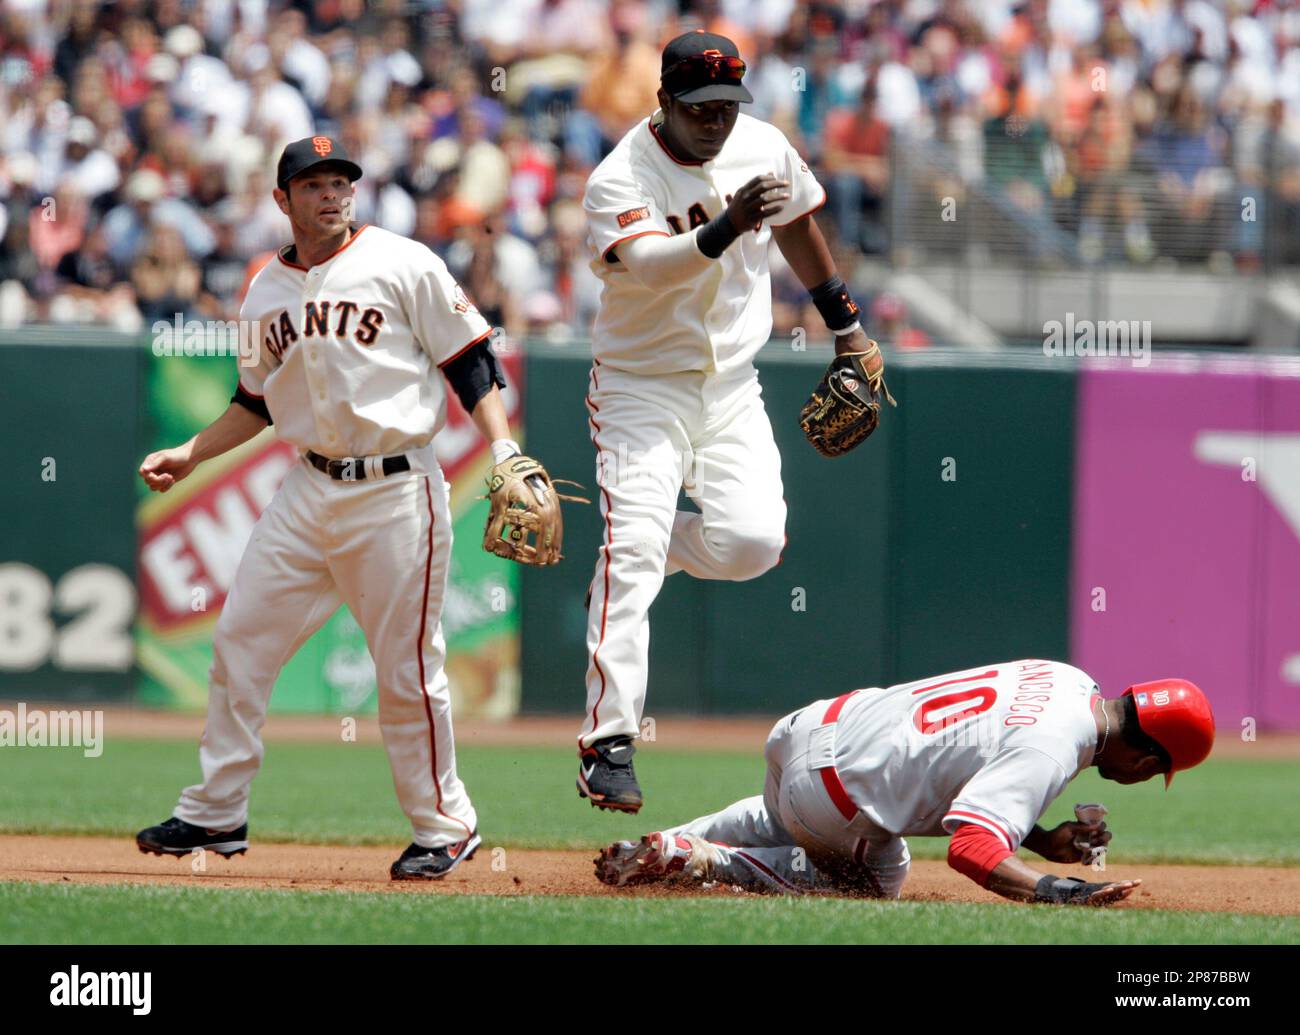 San Francisco Giants shortstop Edgar Renteria, center, helps turn a double  play as Philadelphia Phillies' Ben Francisco, right, is forced out at  second base during the first inning of a baseball game